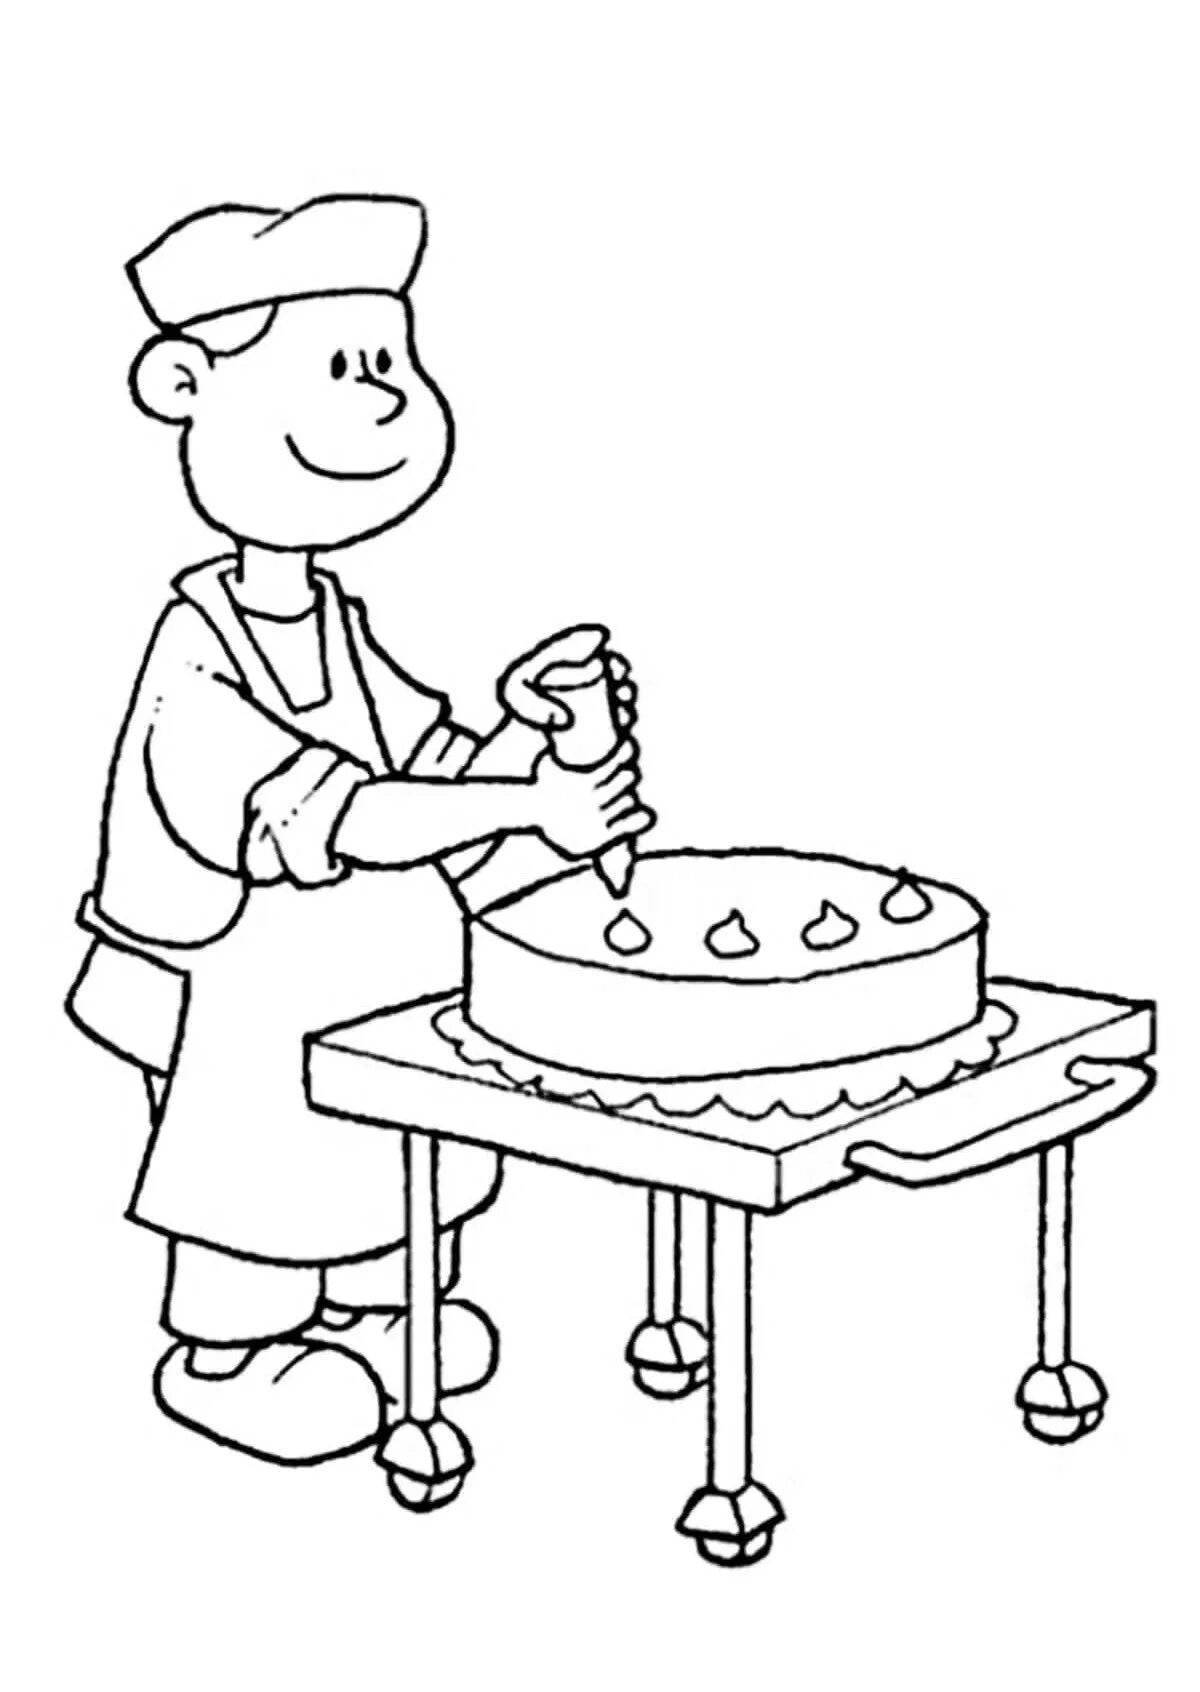 Colorful job coloring pages for students